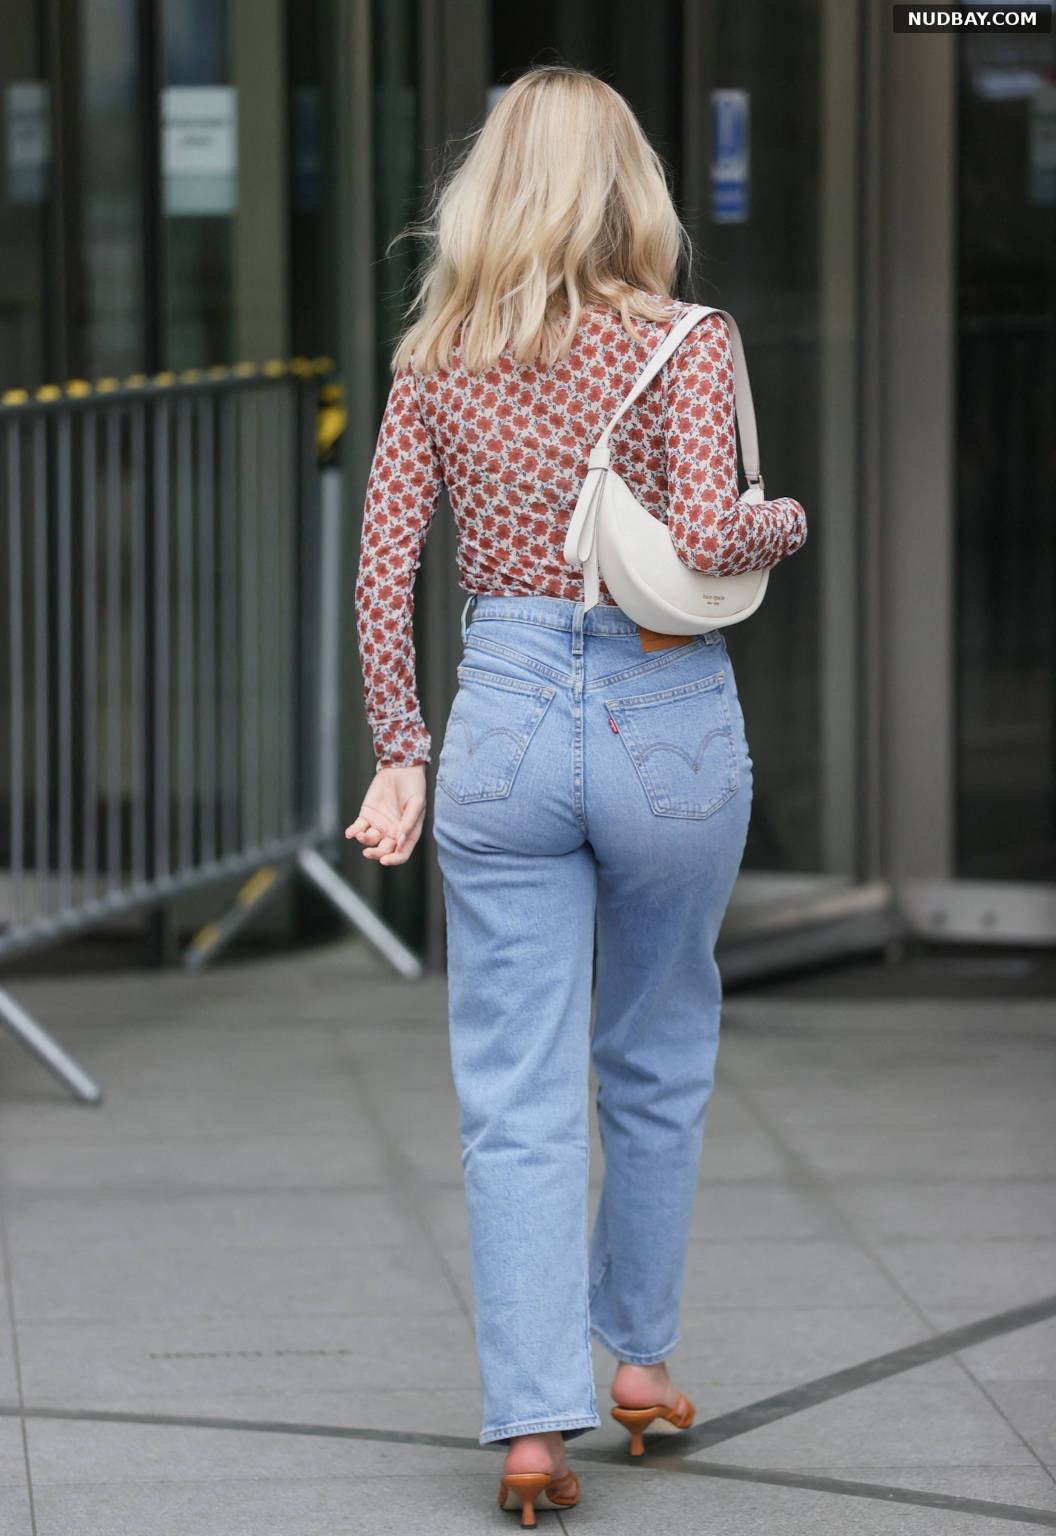 Mollie King Booty at BBC studios in London May 22 2021